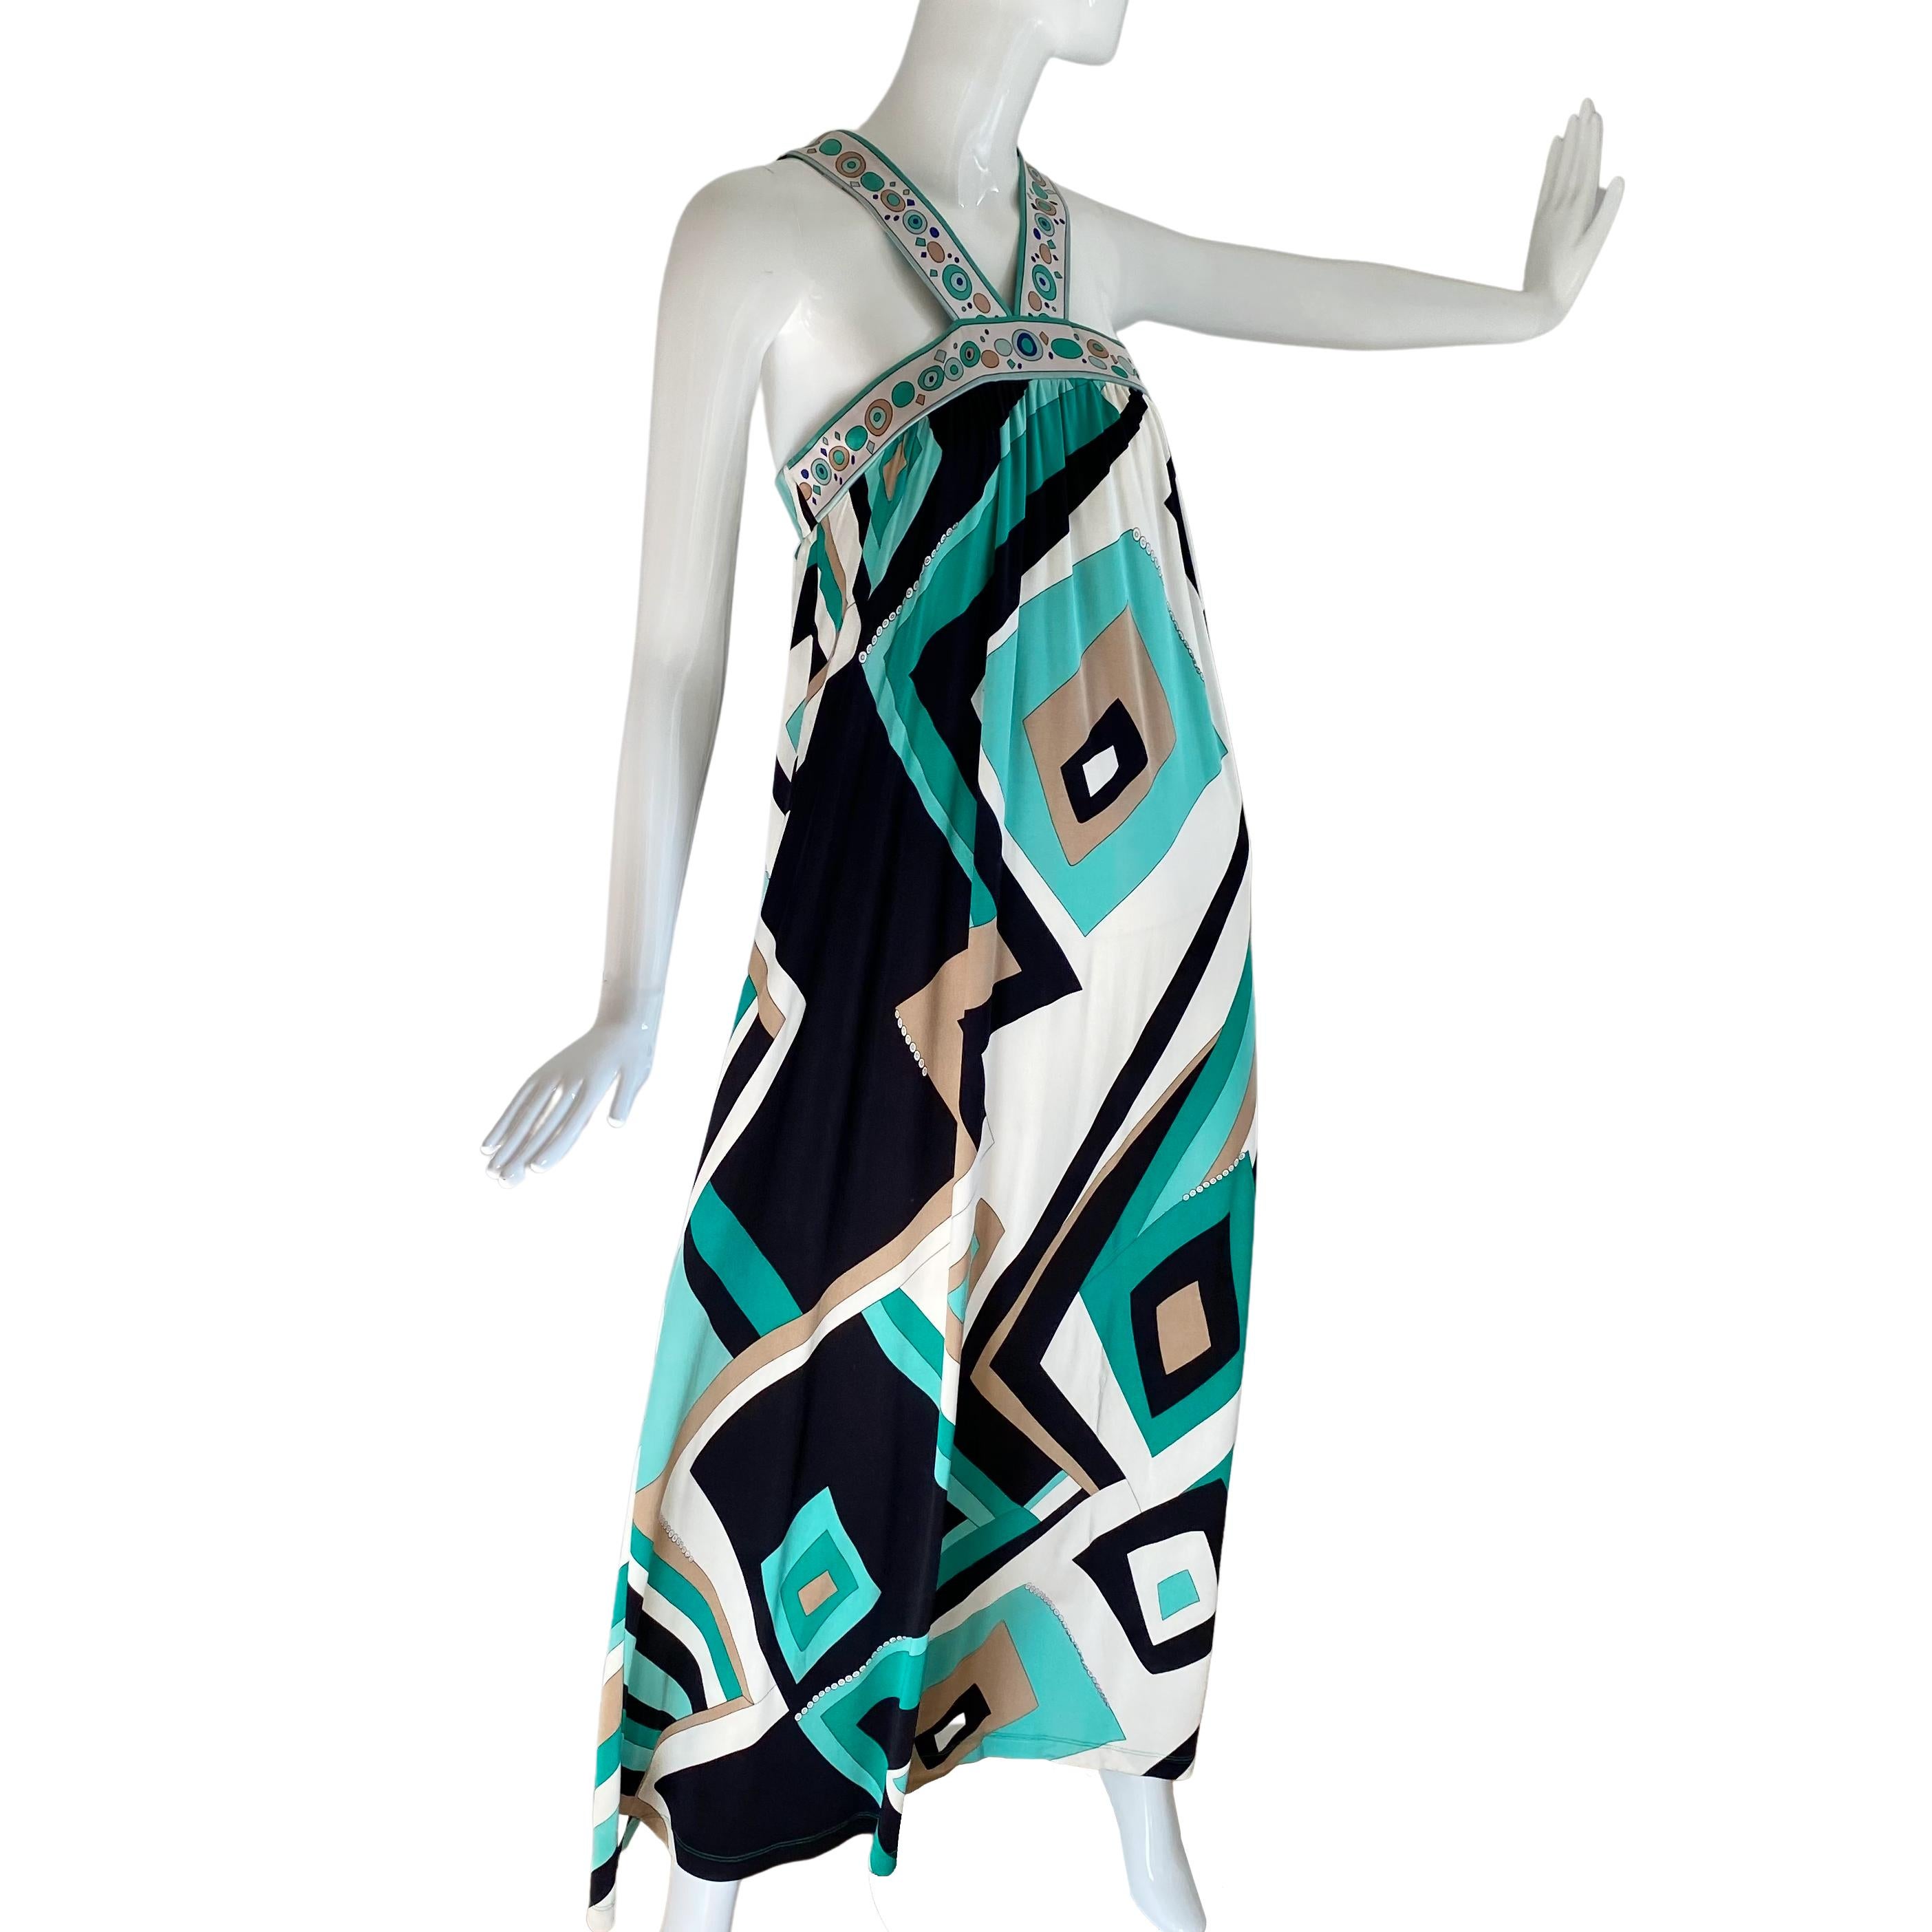 Breezy cool beautiful maxi dress in flattering twin print in seafoam aqua green, sand, black and white.
Wear it with a belt or as is. Dress it up or down.
Back band has invisible stretch for a perfect fit.
 Generous skirt made with yards of